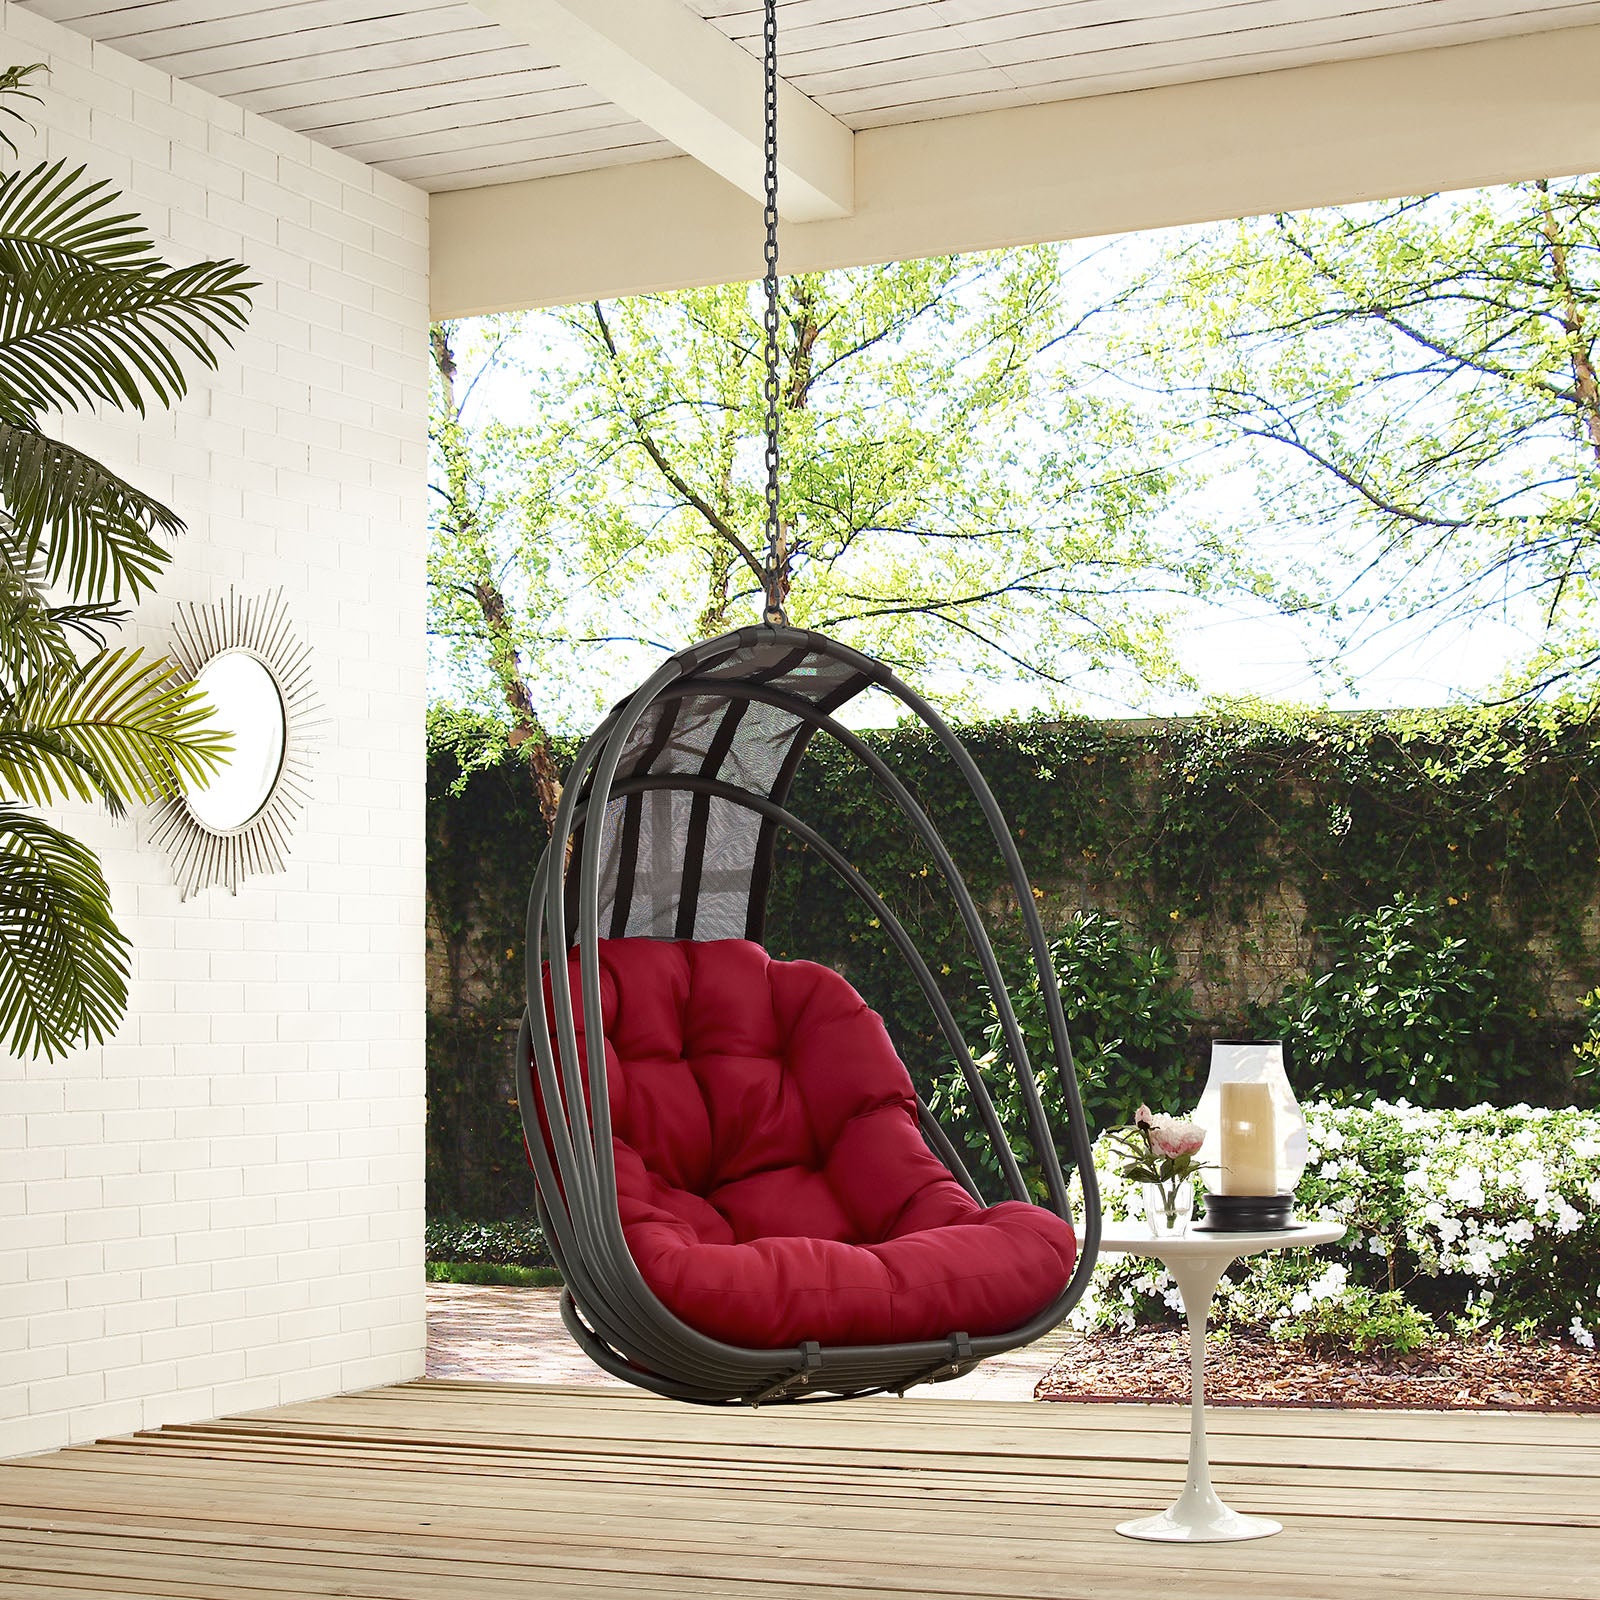 Whisk Outdoor Patio Swing Chair Without Stand - East Shore Modern Home Furnishings